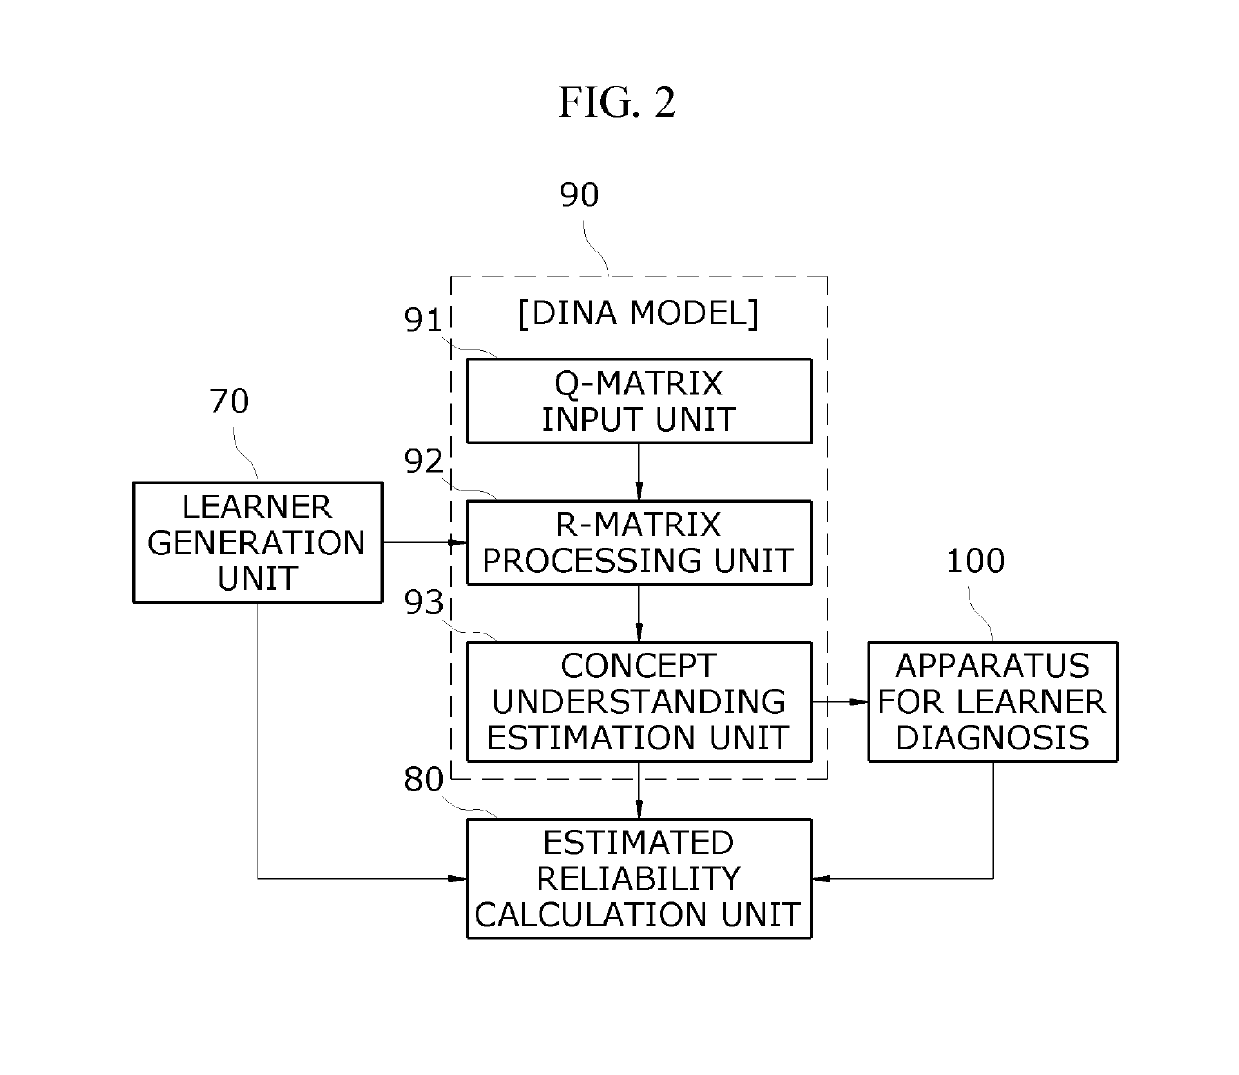 Method and apparatus for learner diagnosis using reliability of cognitive diagnostic model